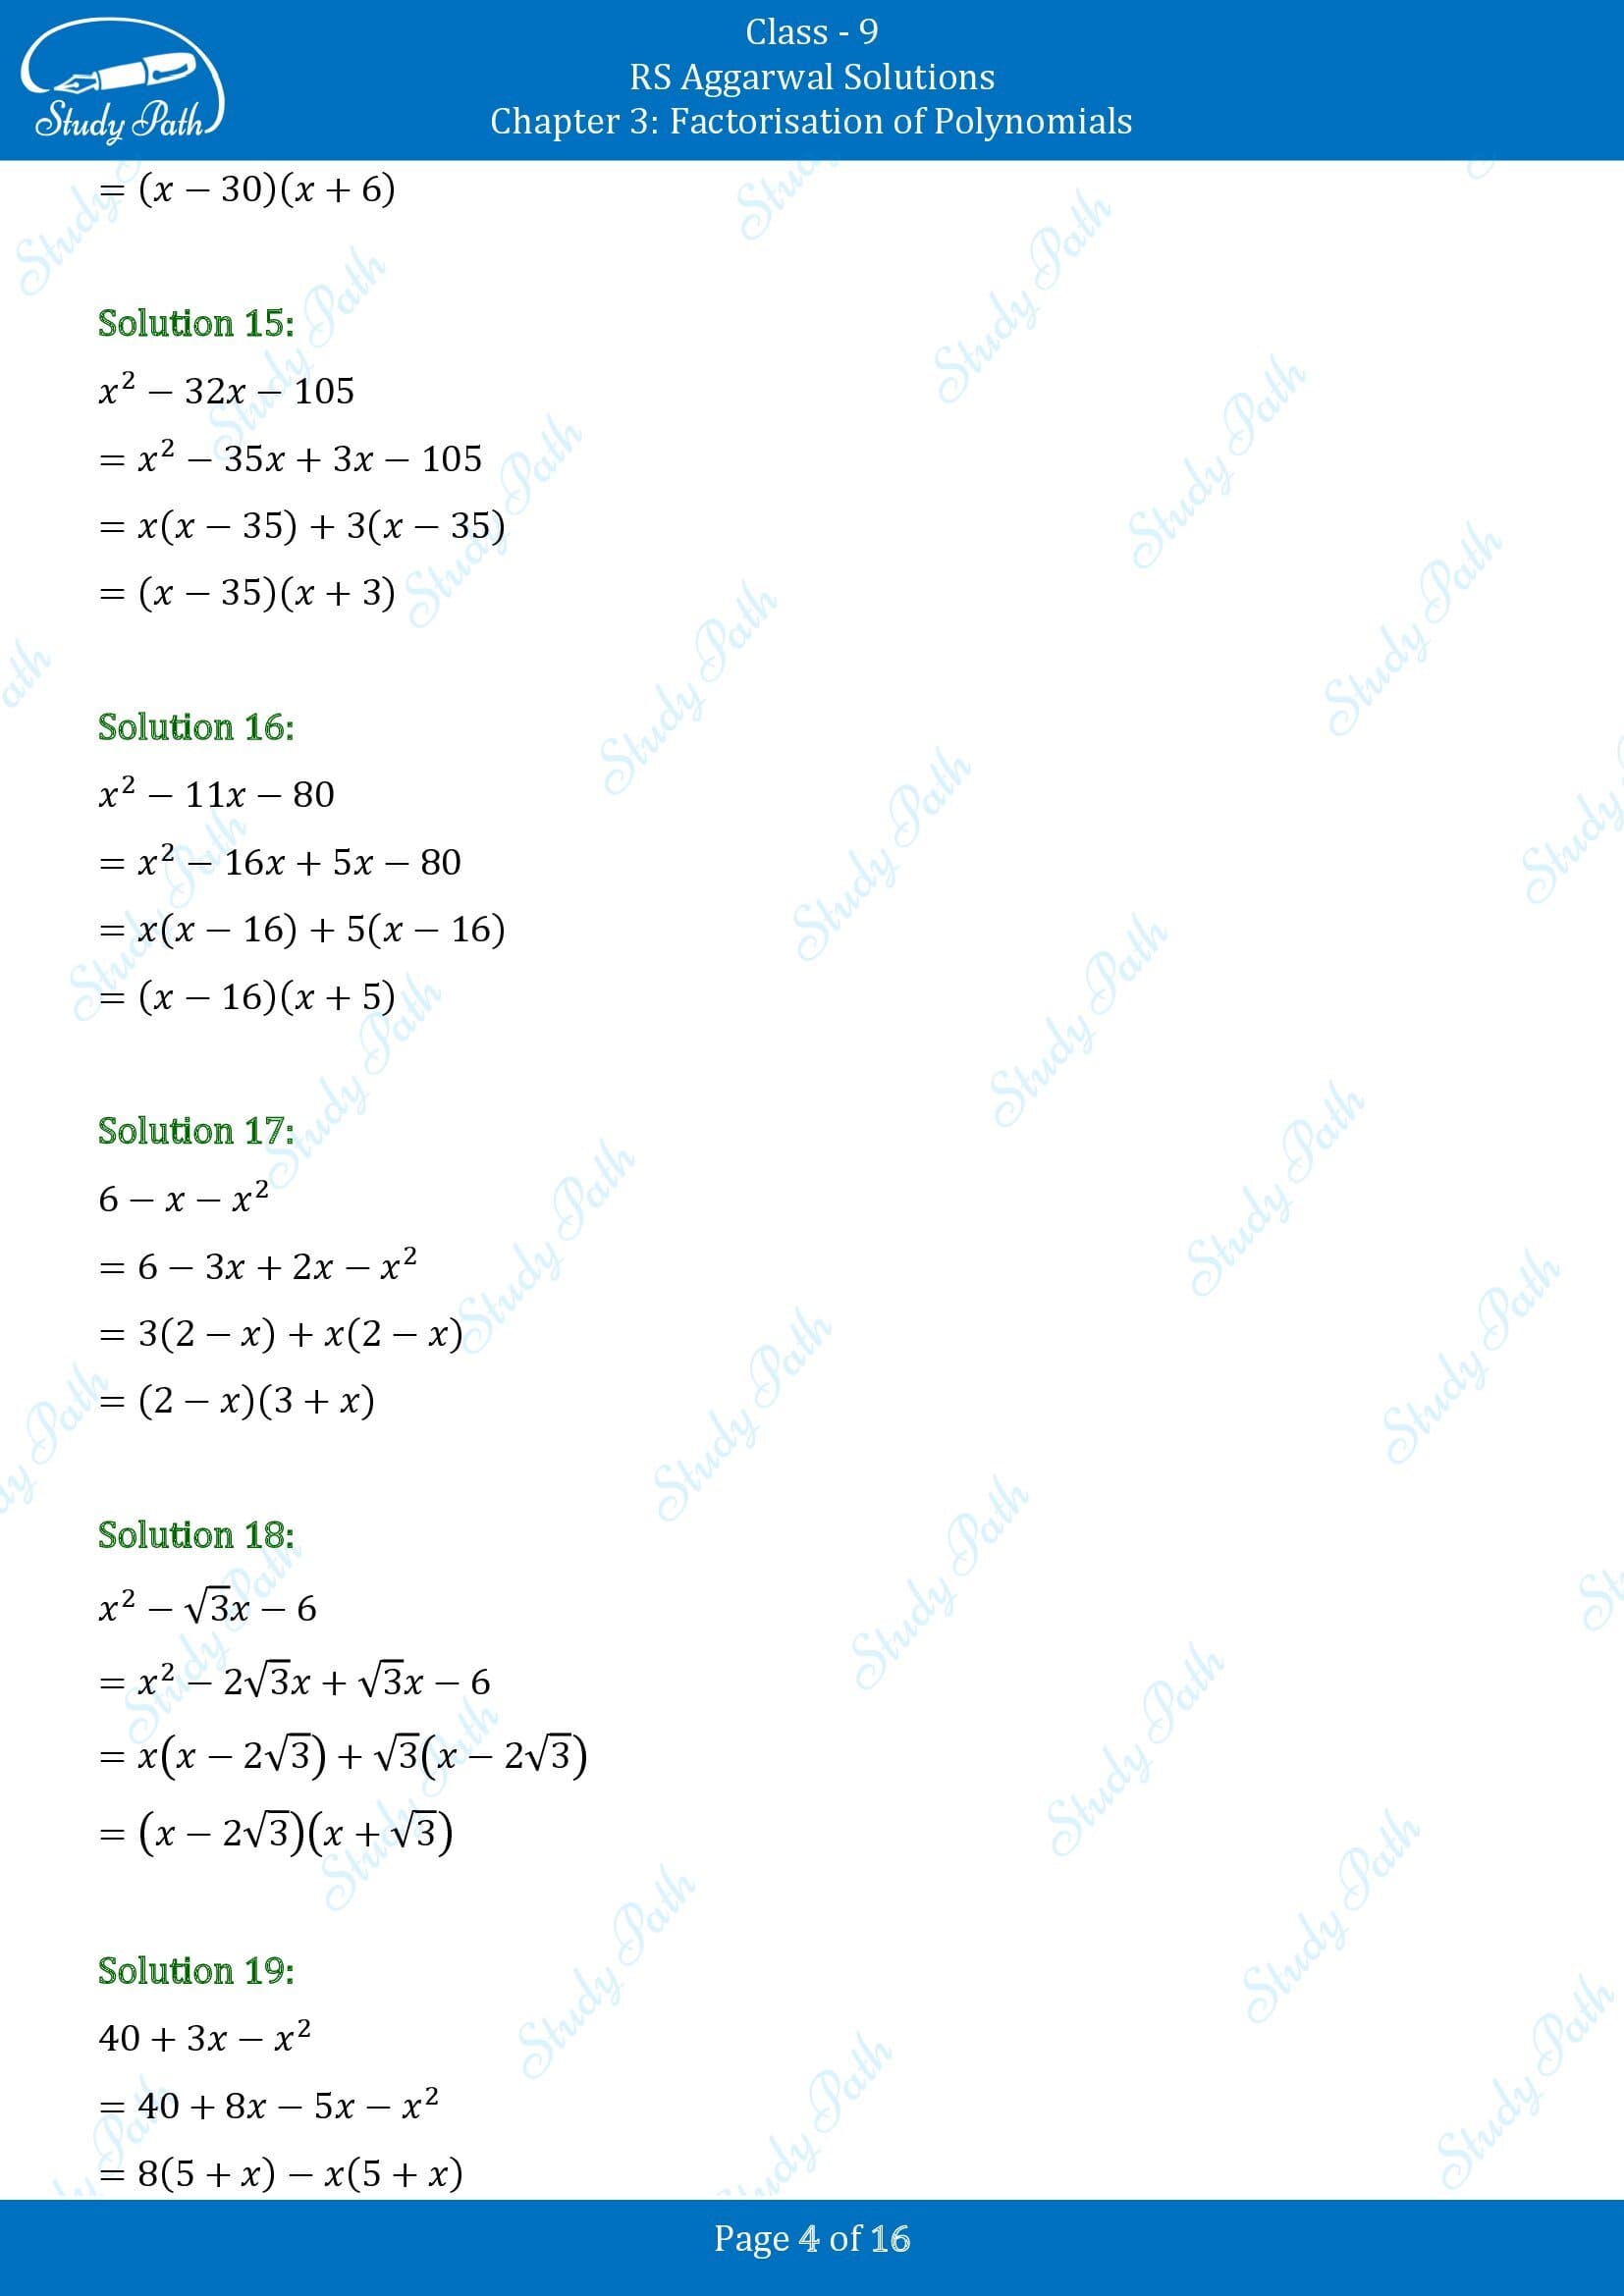 RS Aggarwal Solutions Class 9 Chapter 3 Factorisation of Polynomials Exercise 3C 00004